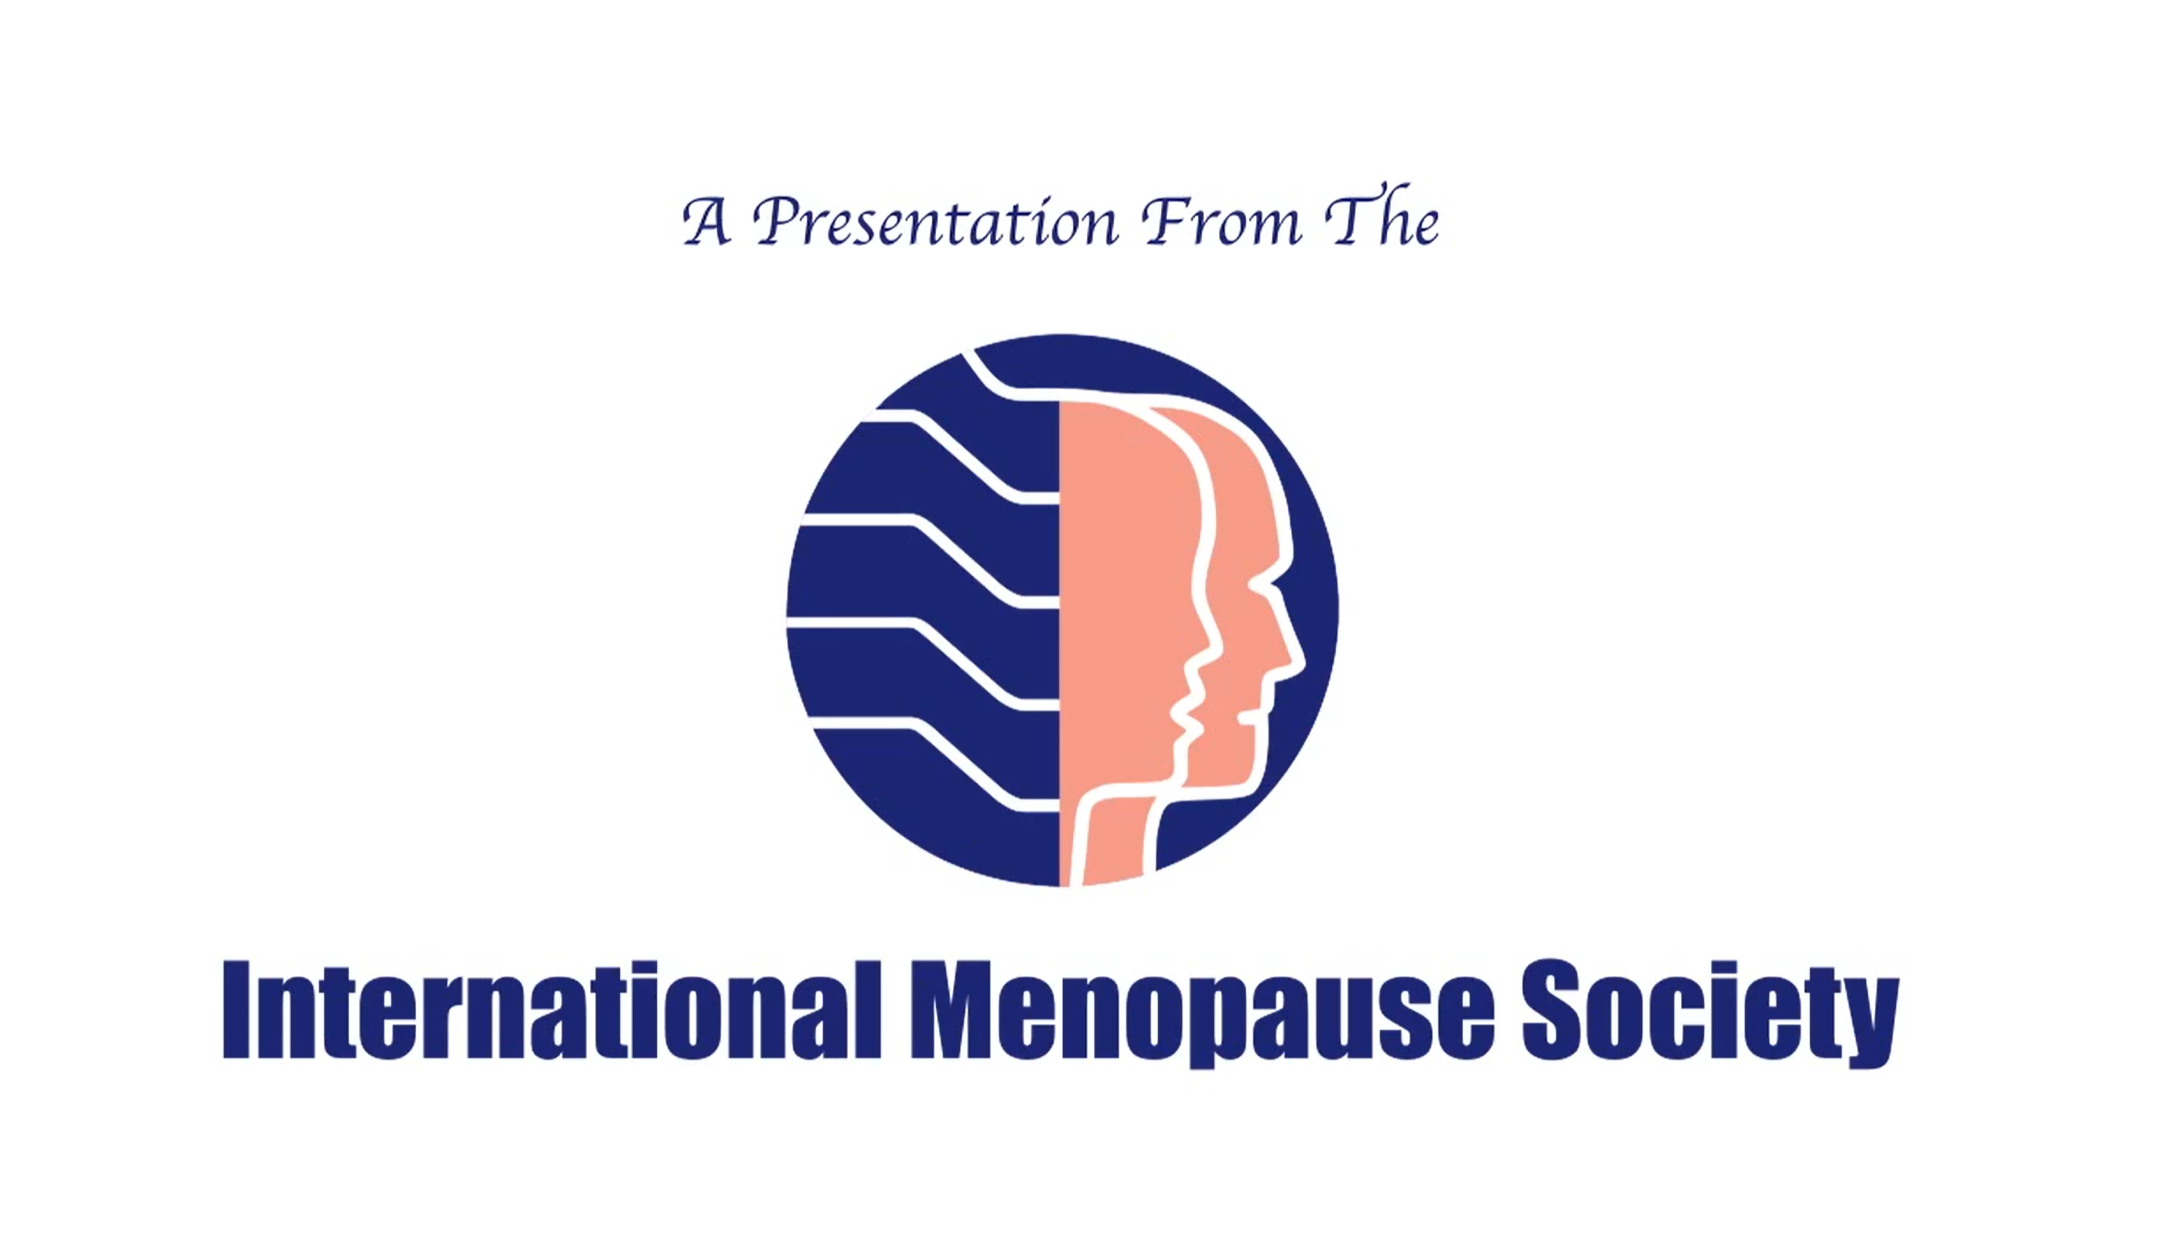 Video – Menopause: Will it affect my sex life? with Prof Susan Davis